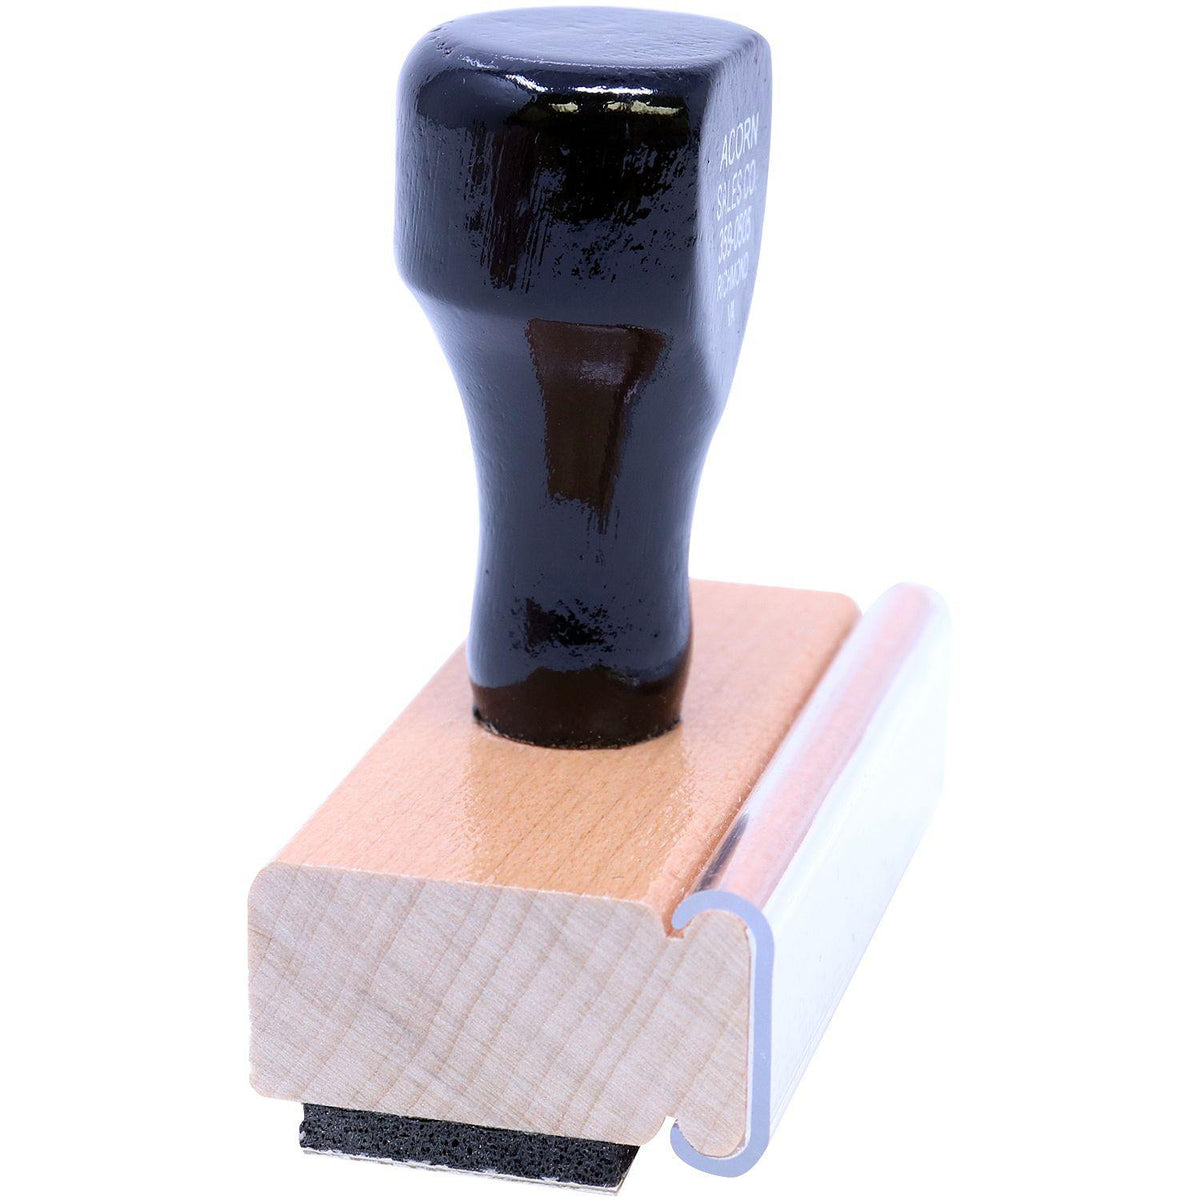 Side View of Large Archivar Rubber Stamp at an Angle